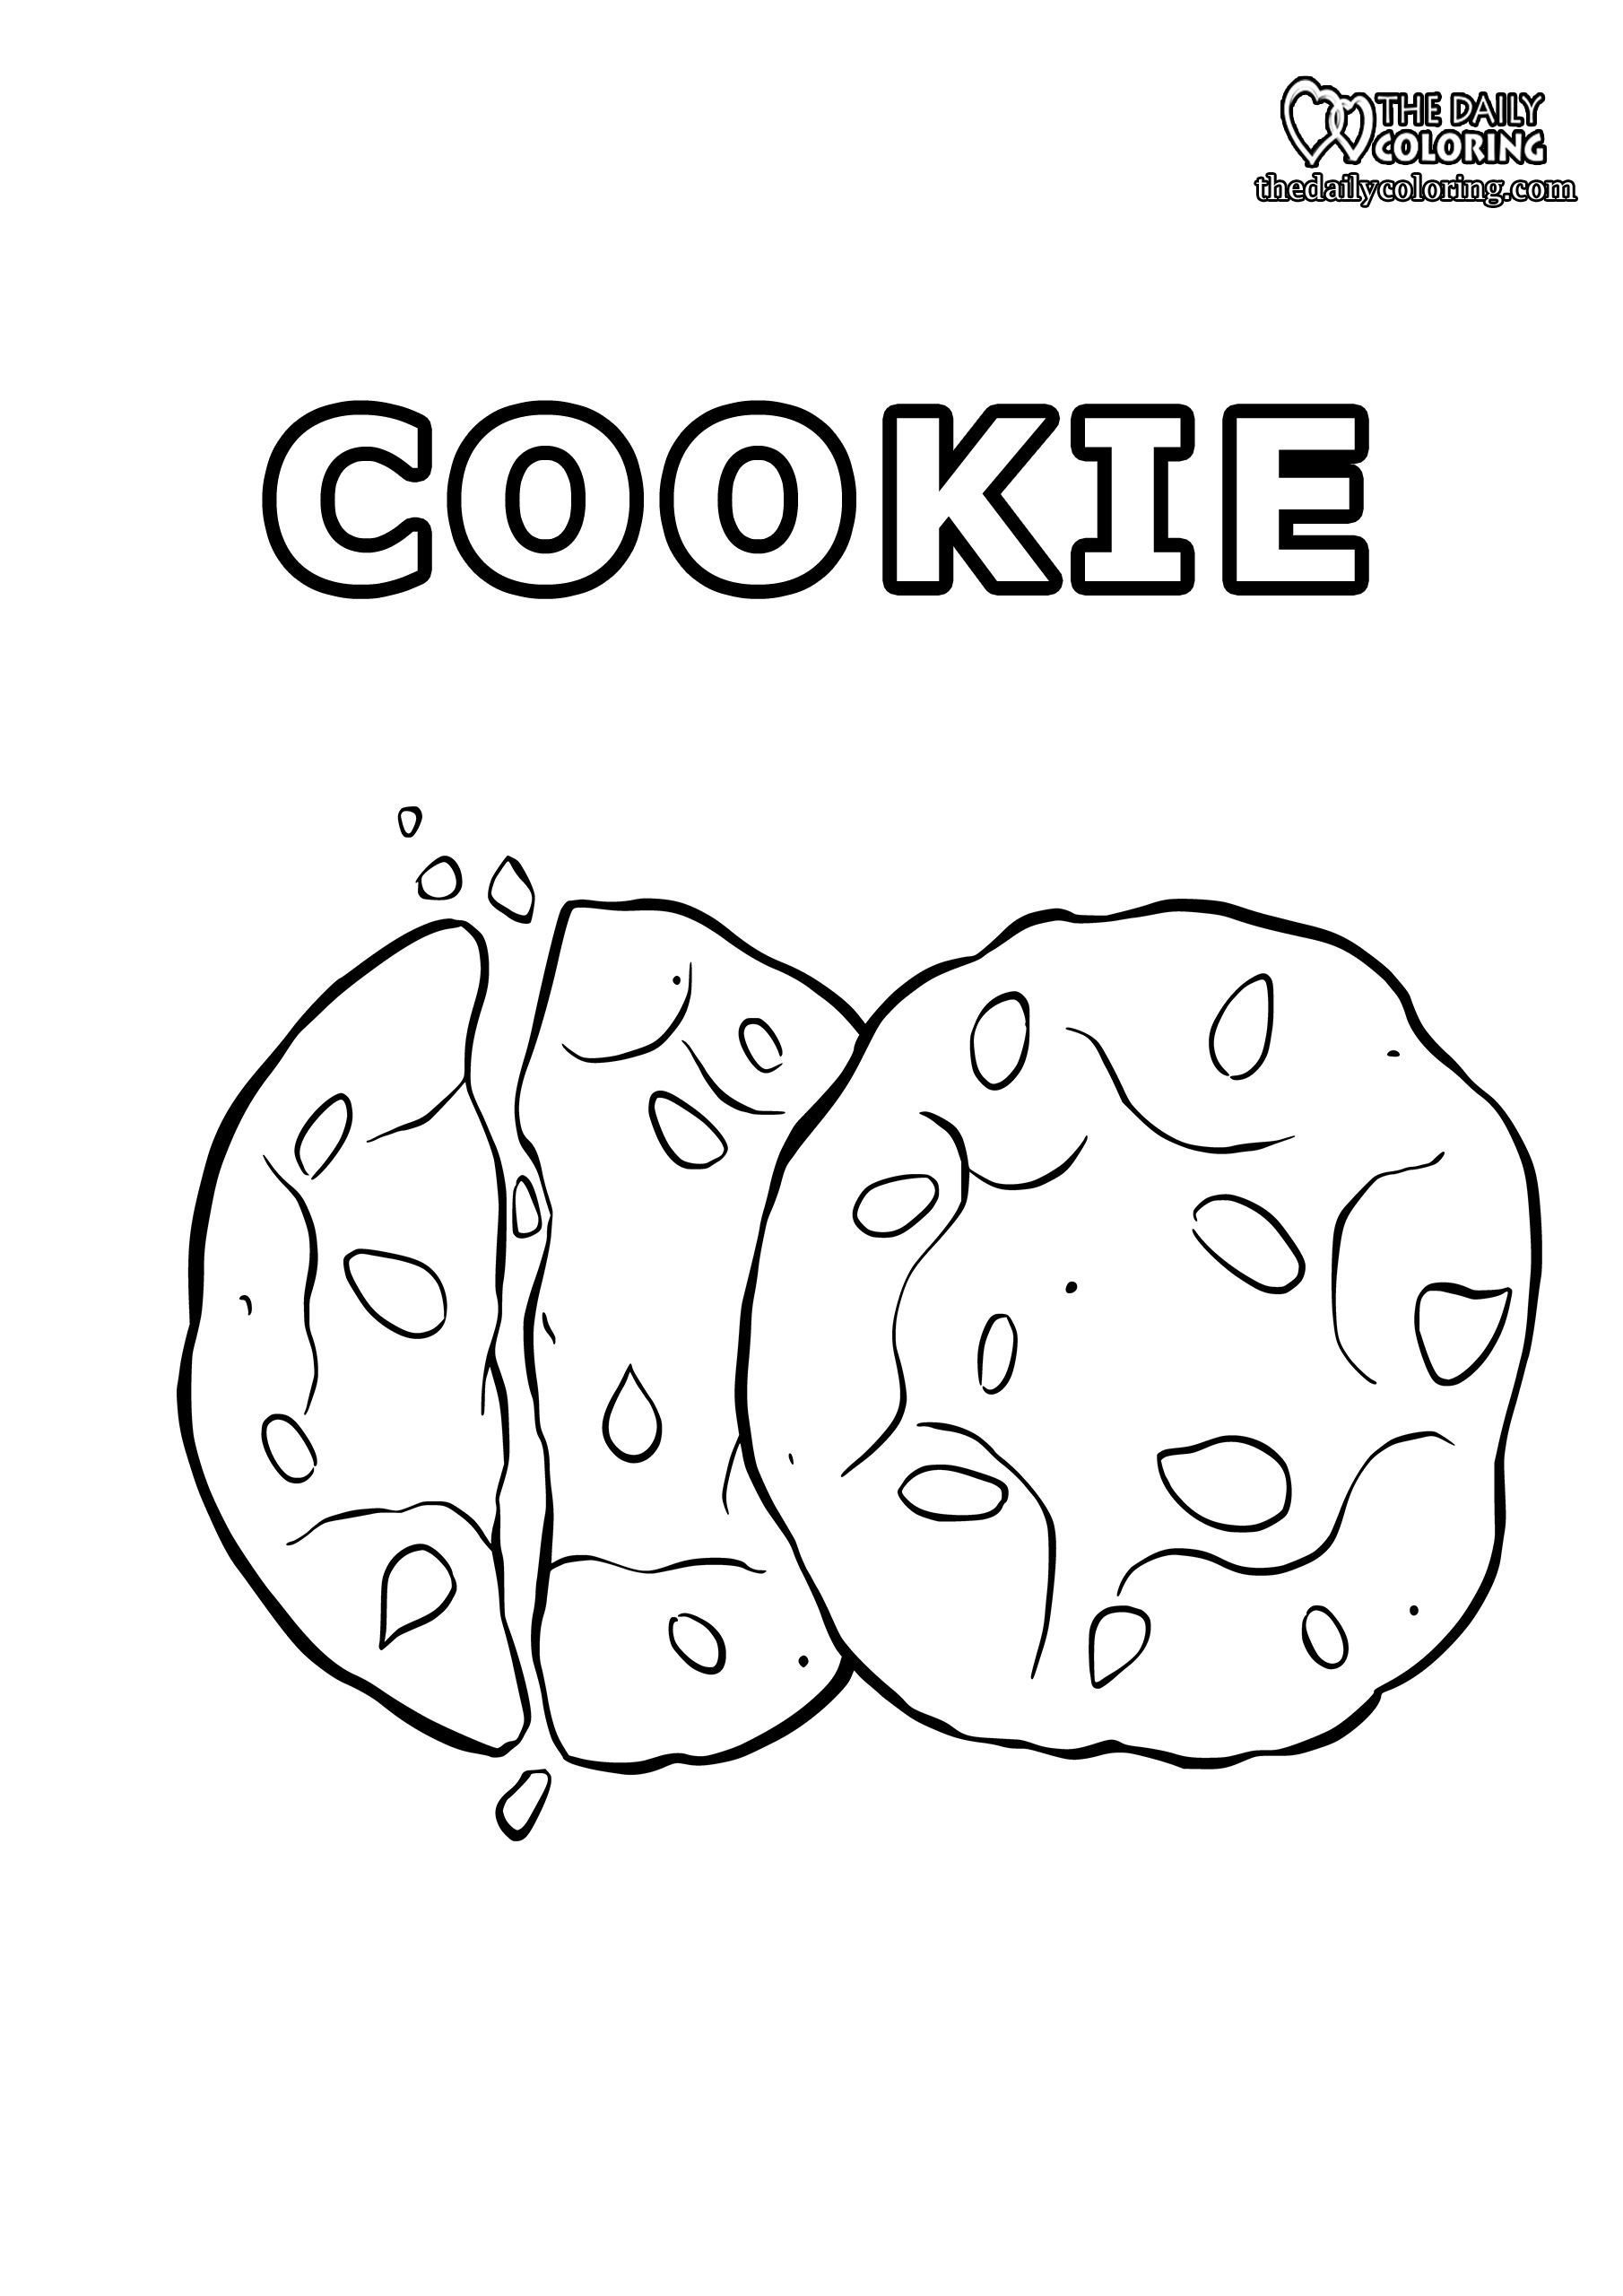 Preschool Bakery Coloring Pages - The Daily Coloring